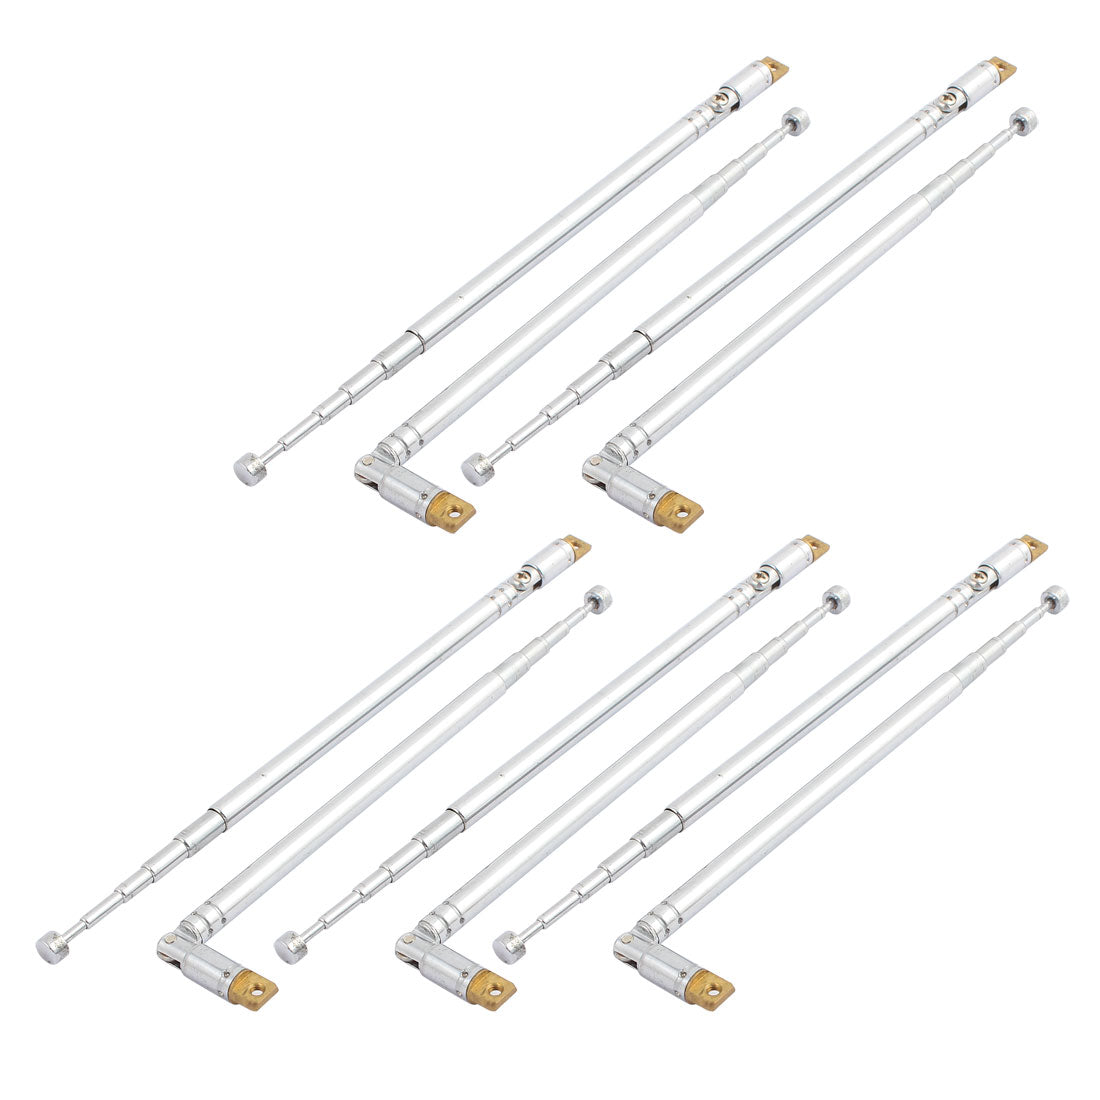 uxcell Uxcell FM Radio TV Metal 6 Sections Telescopic Antenna Aerial Silver 48.3cm Long 10pcs